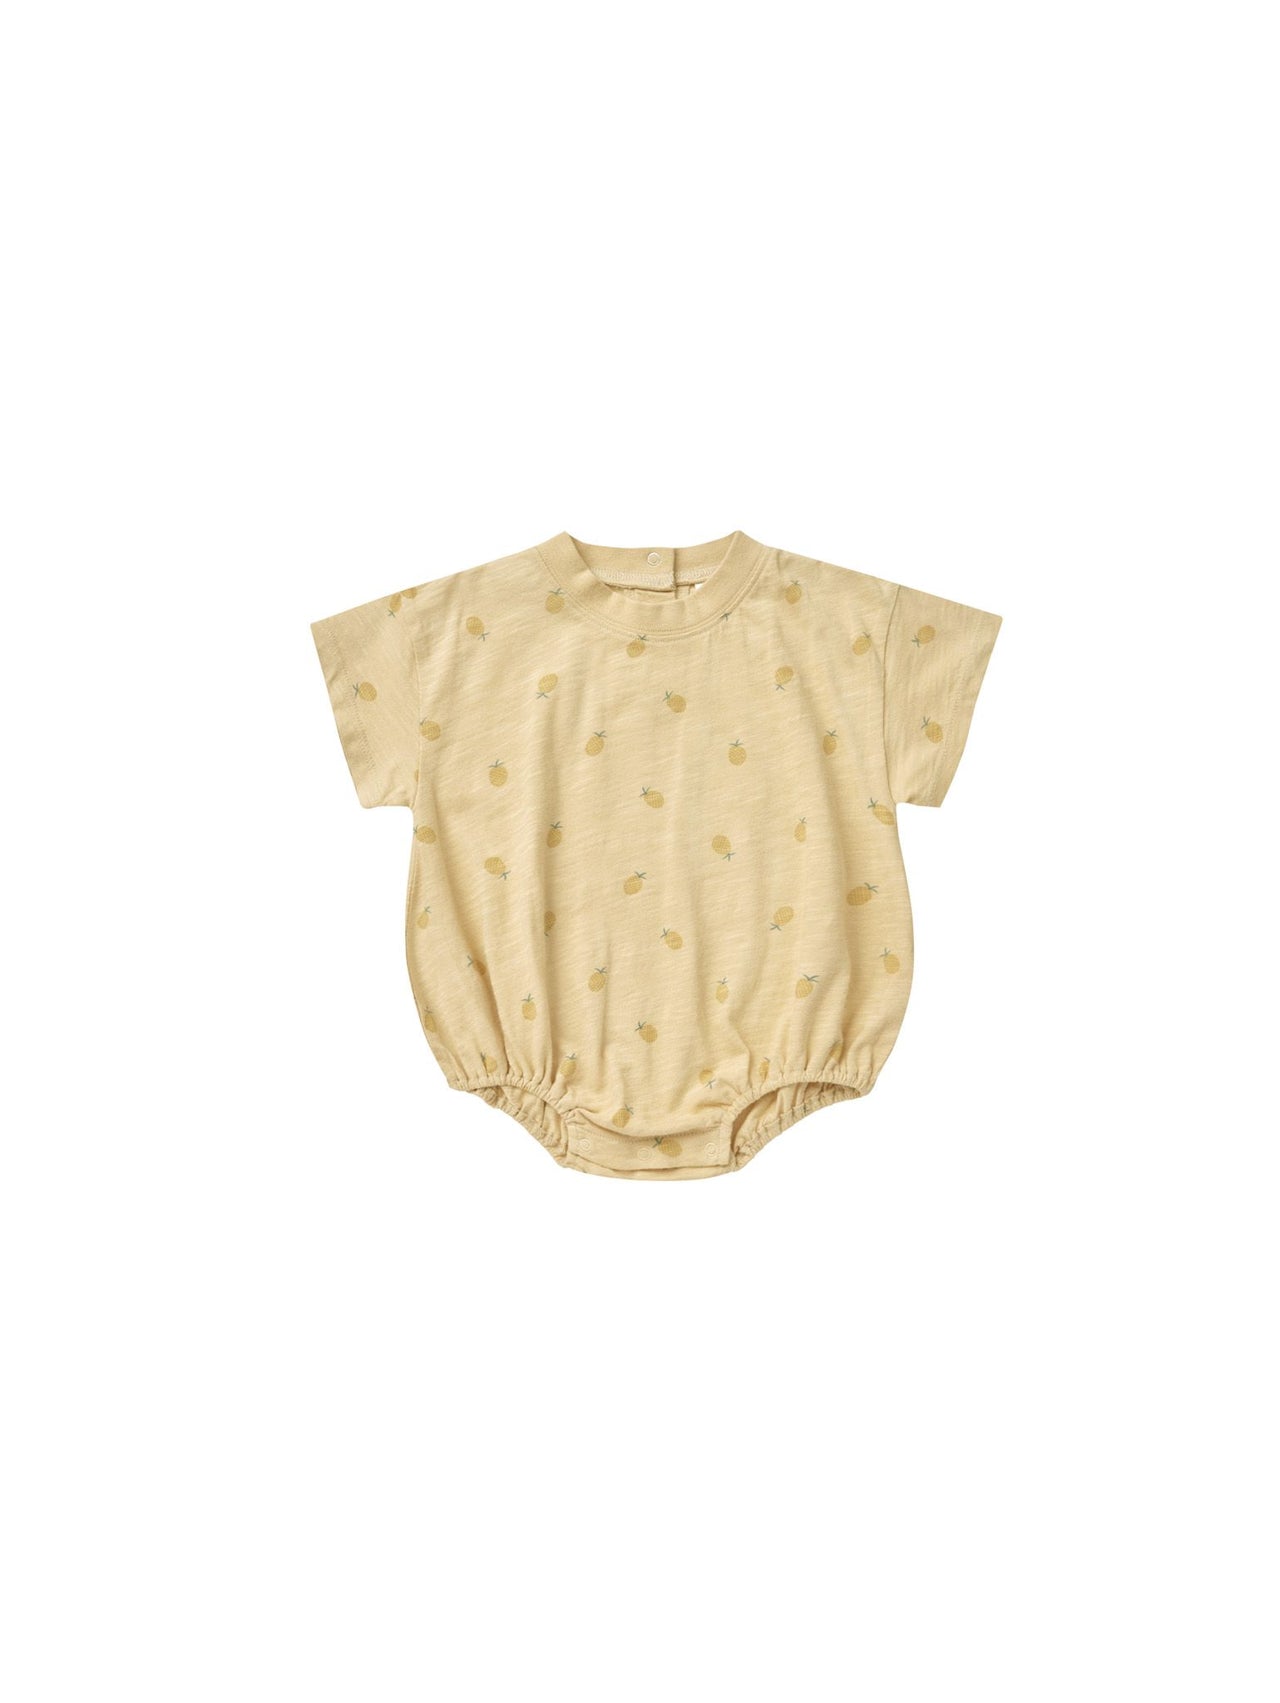 Rylee + Cru Relaxed Bubble Romper, Pineapple